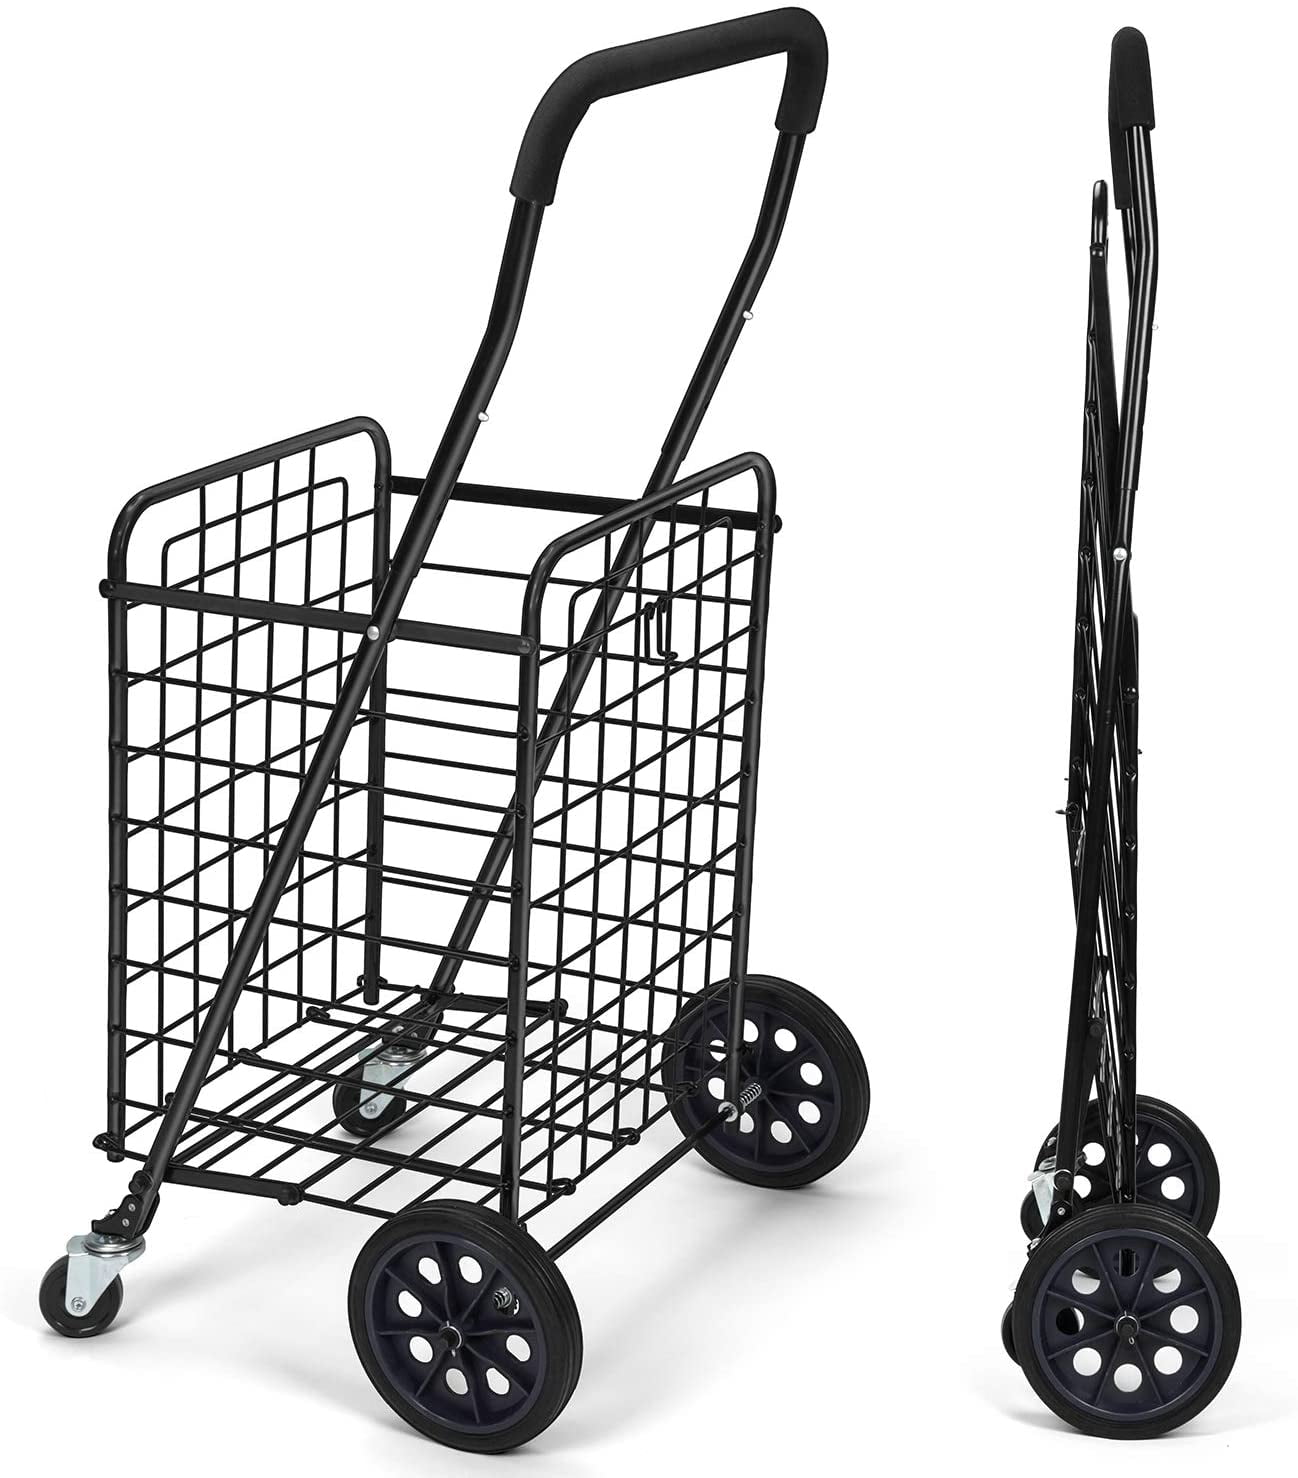 Good L Corp.® 40W Steel Shopping Cart 11 CuFtCapacity - 251772 -  GLOBALindustrial.com